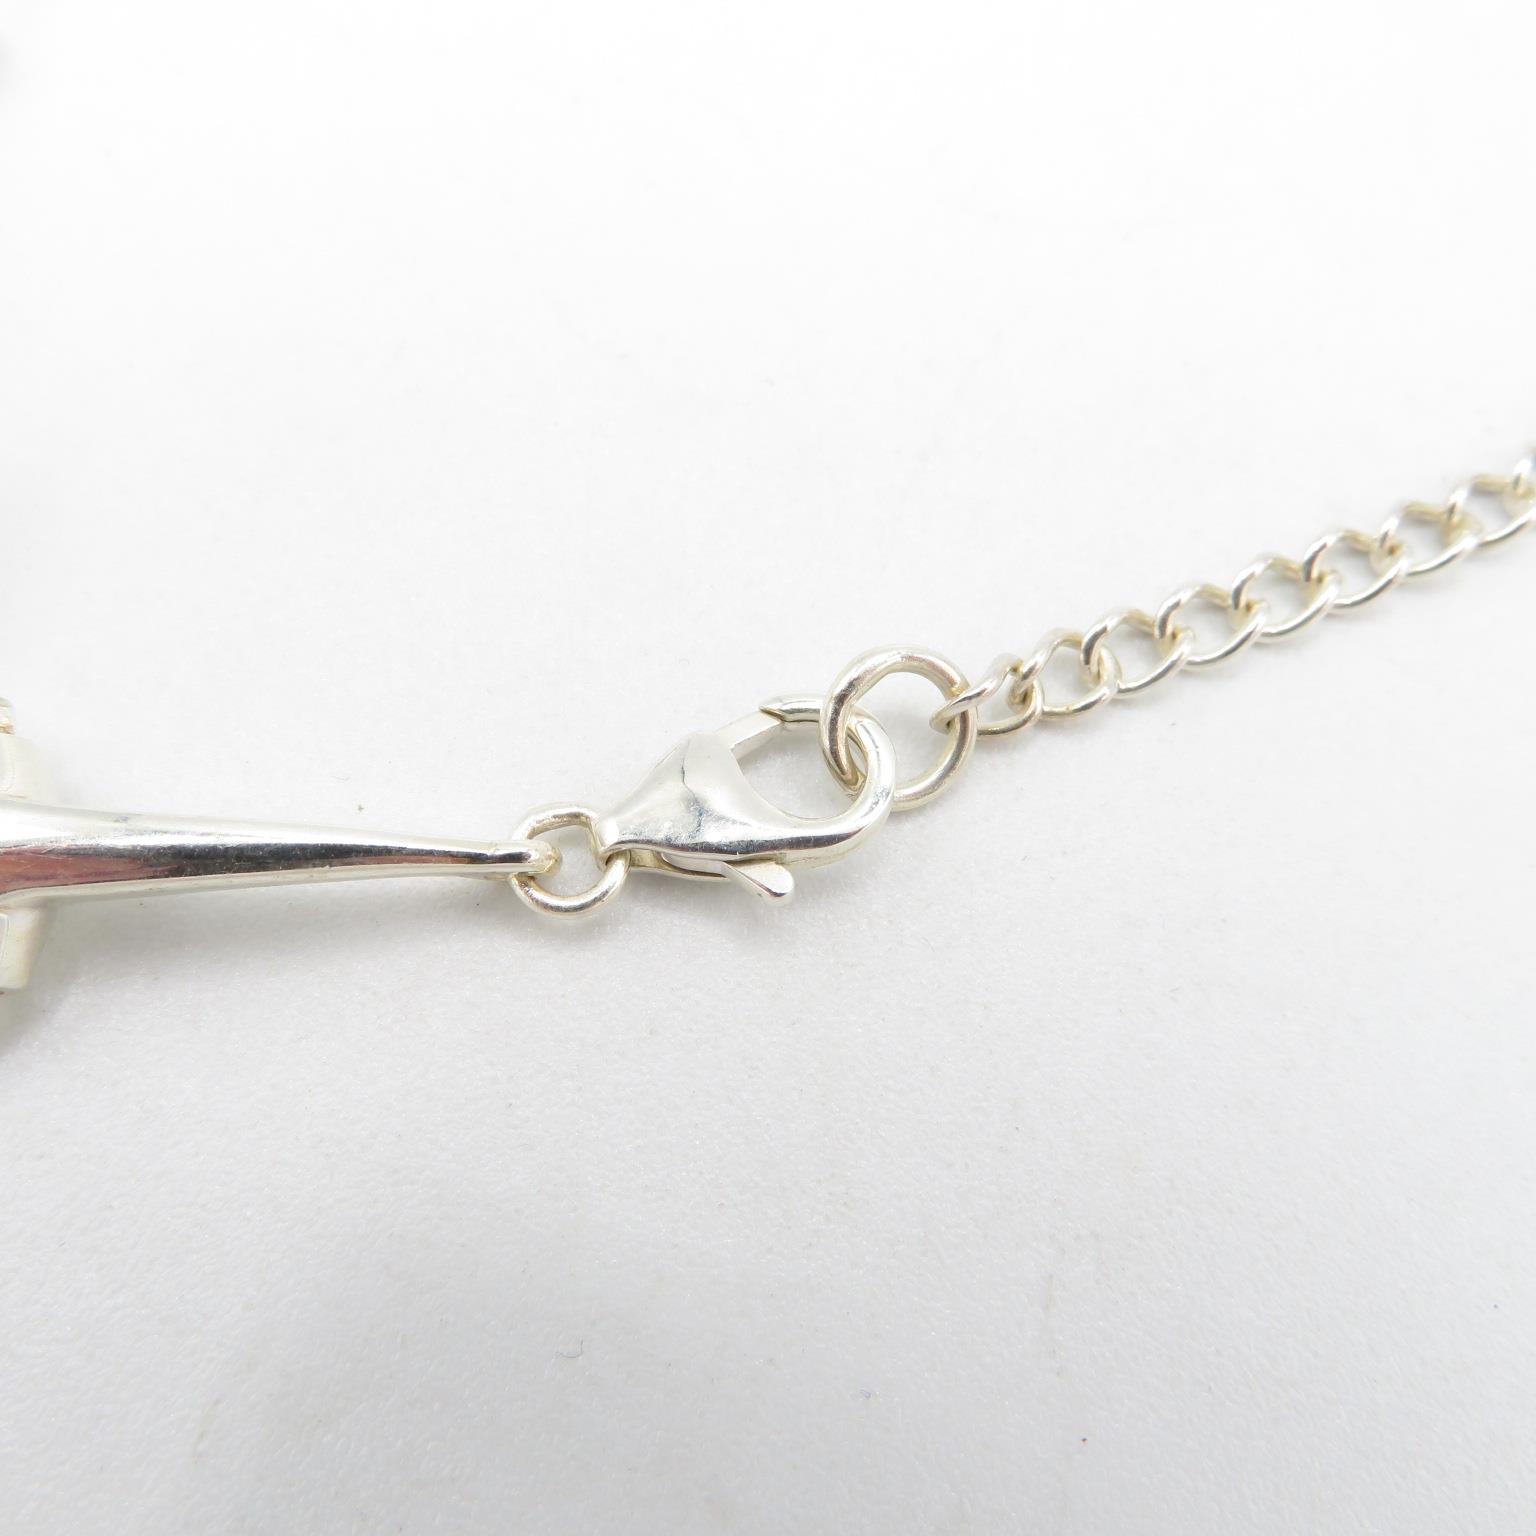 HM 925 Sterling Silver Stirrup Link design necklace in excellent condition (51.5g) length 44cm - Image 4 of 5